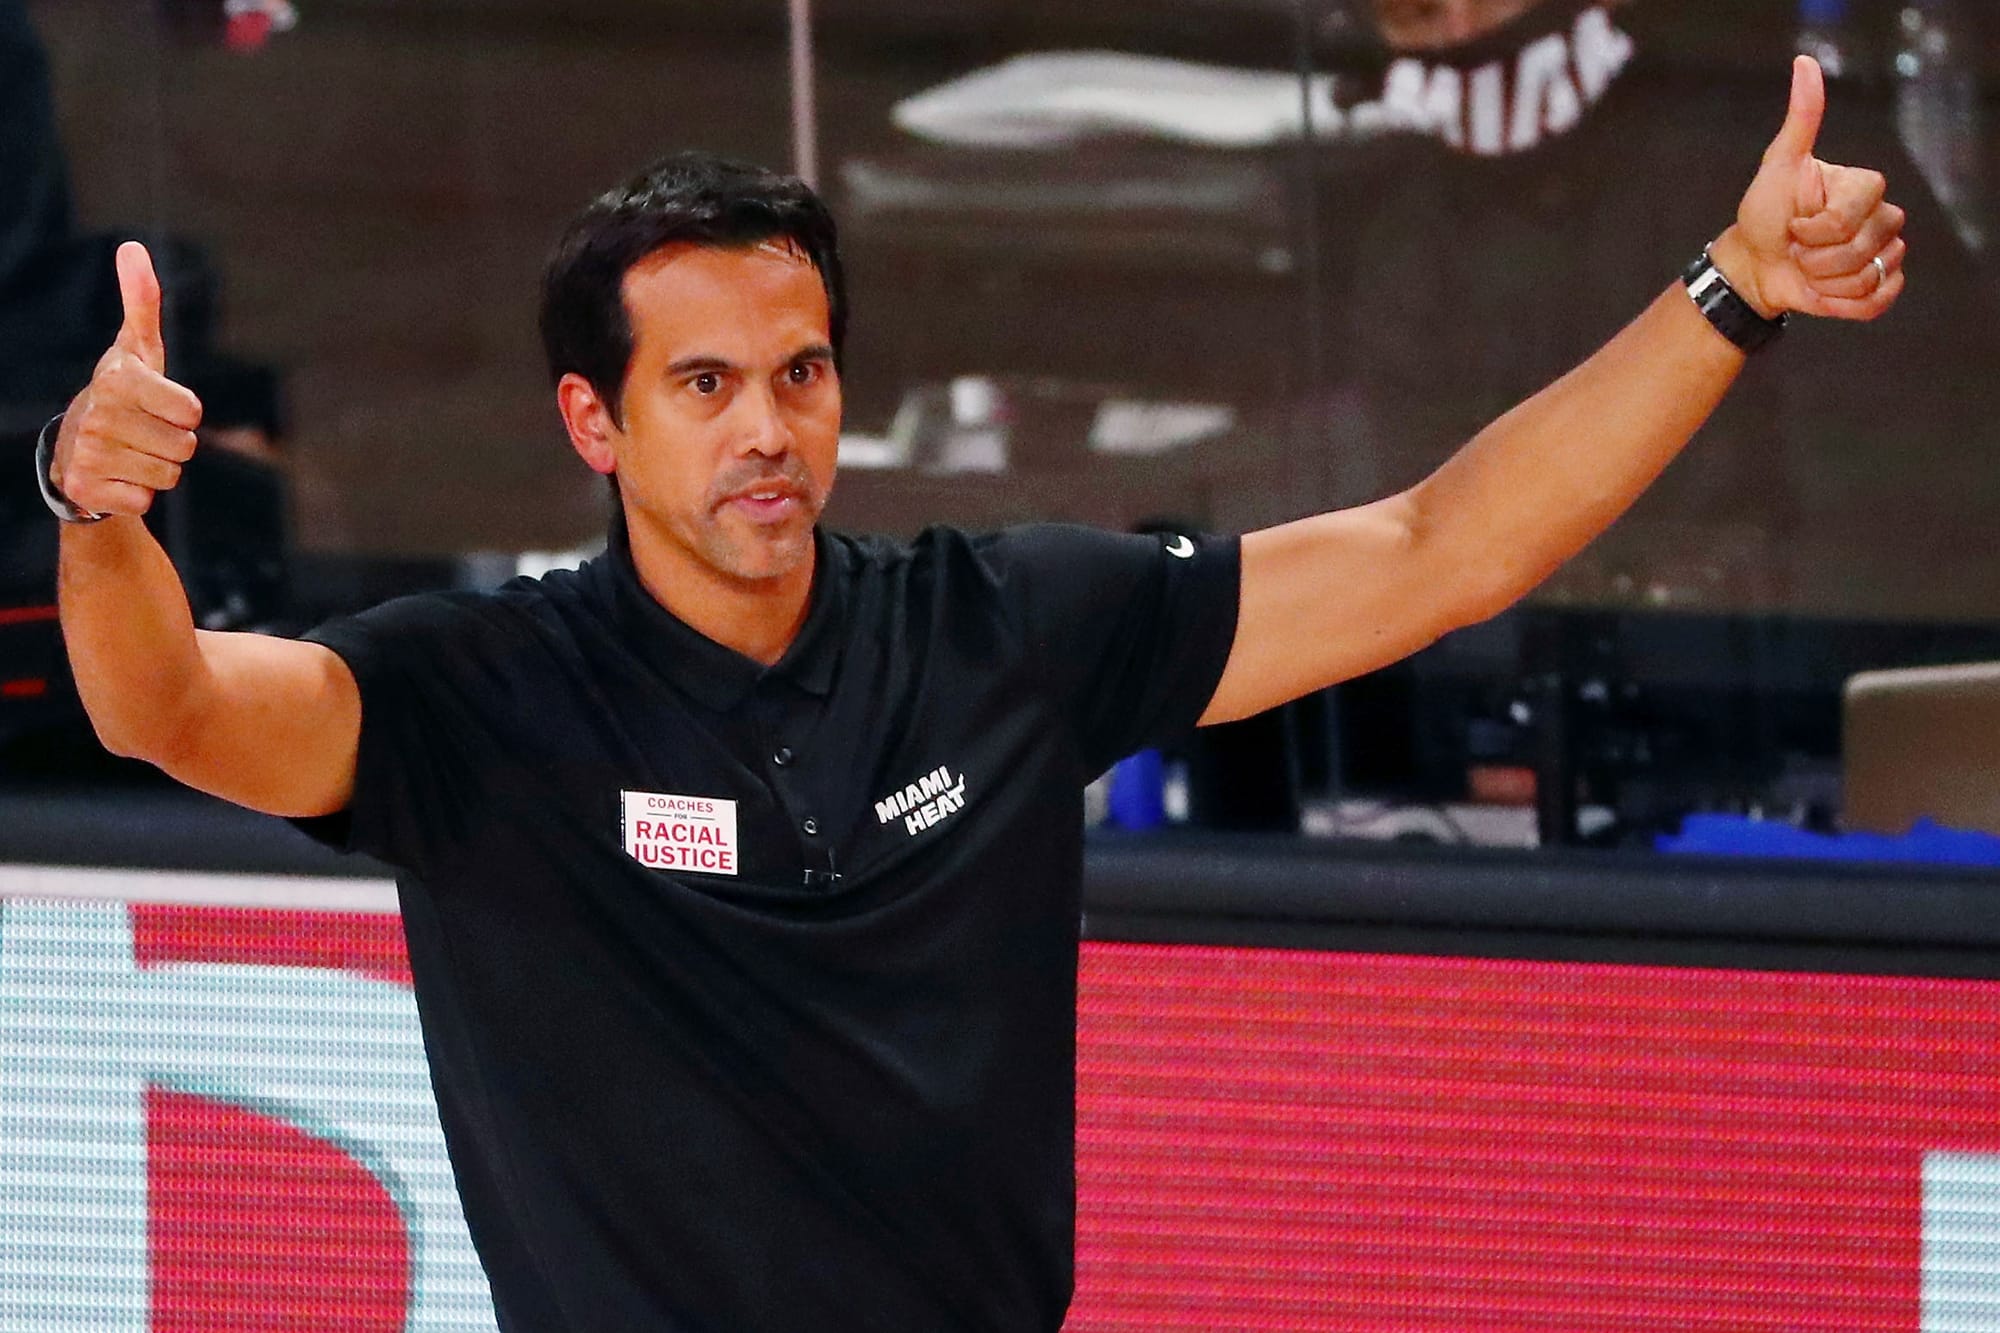 Miami Heat Makes History: Erik Spoelstra Secures Record-Breaking 8-Year, $120M Contract Extension